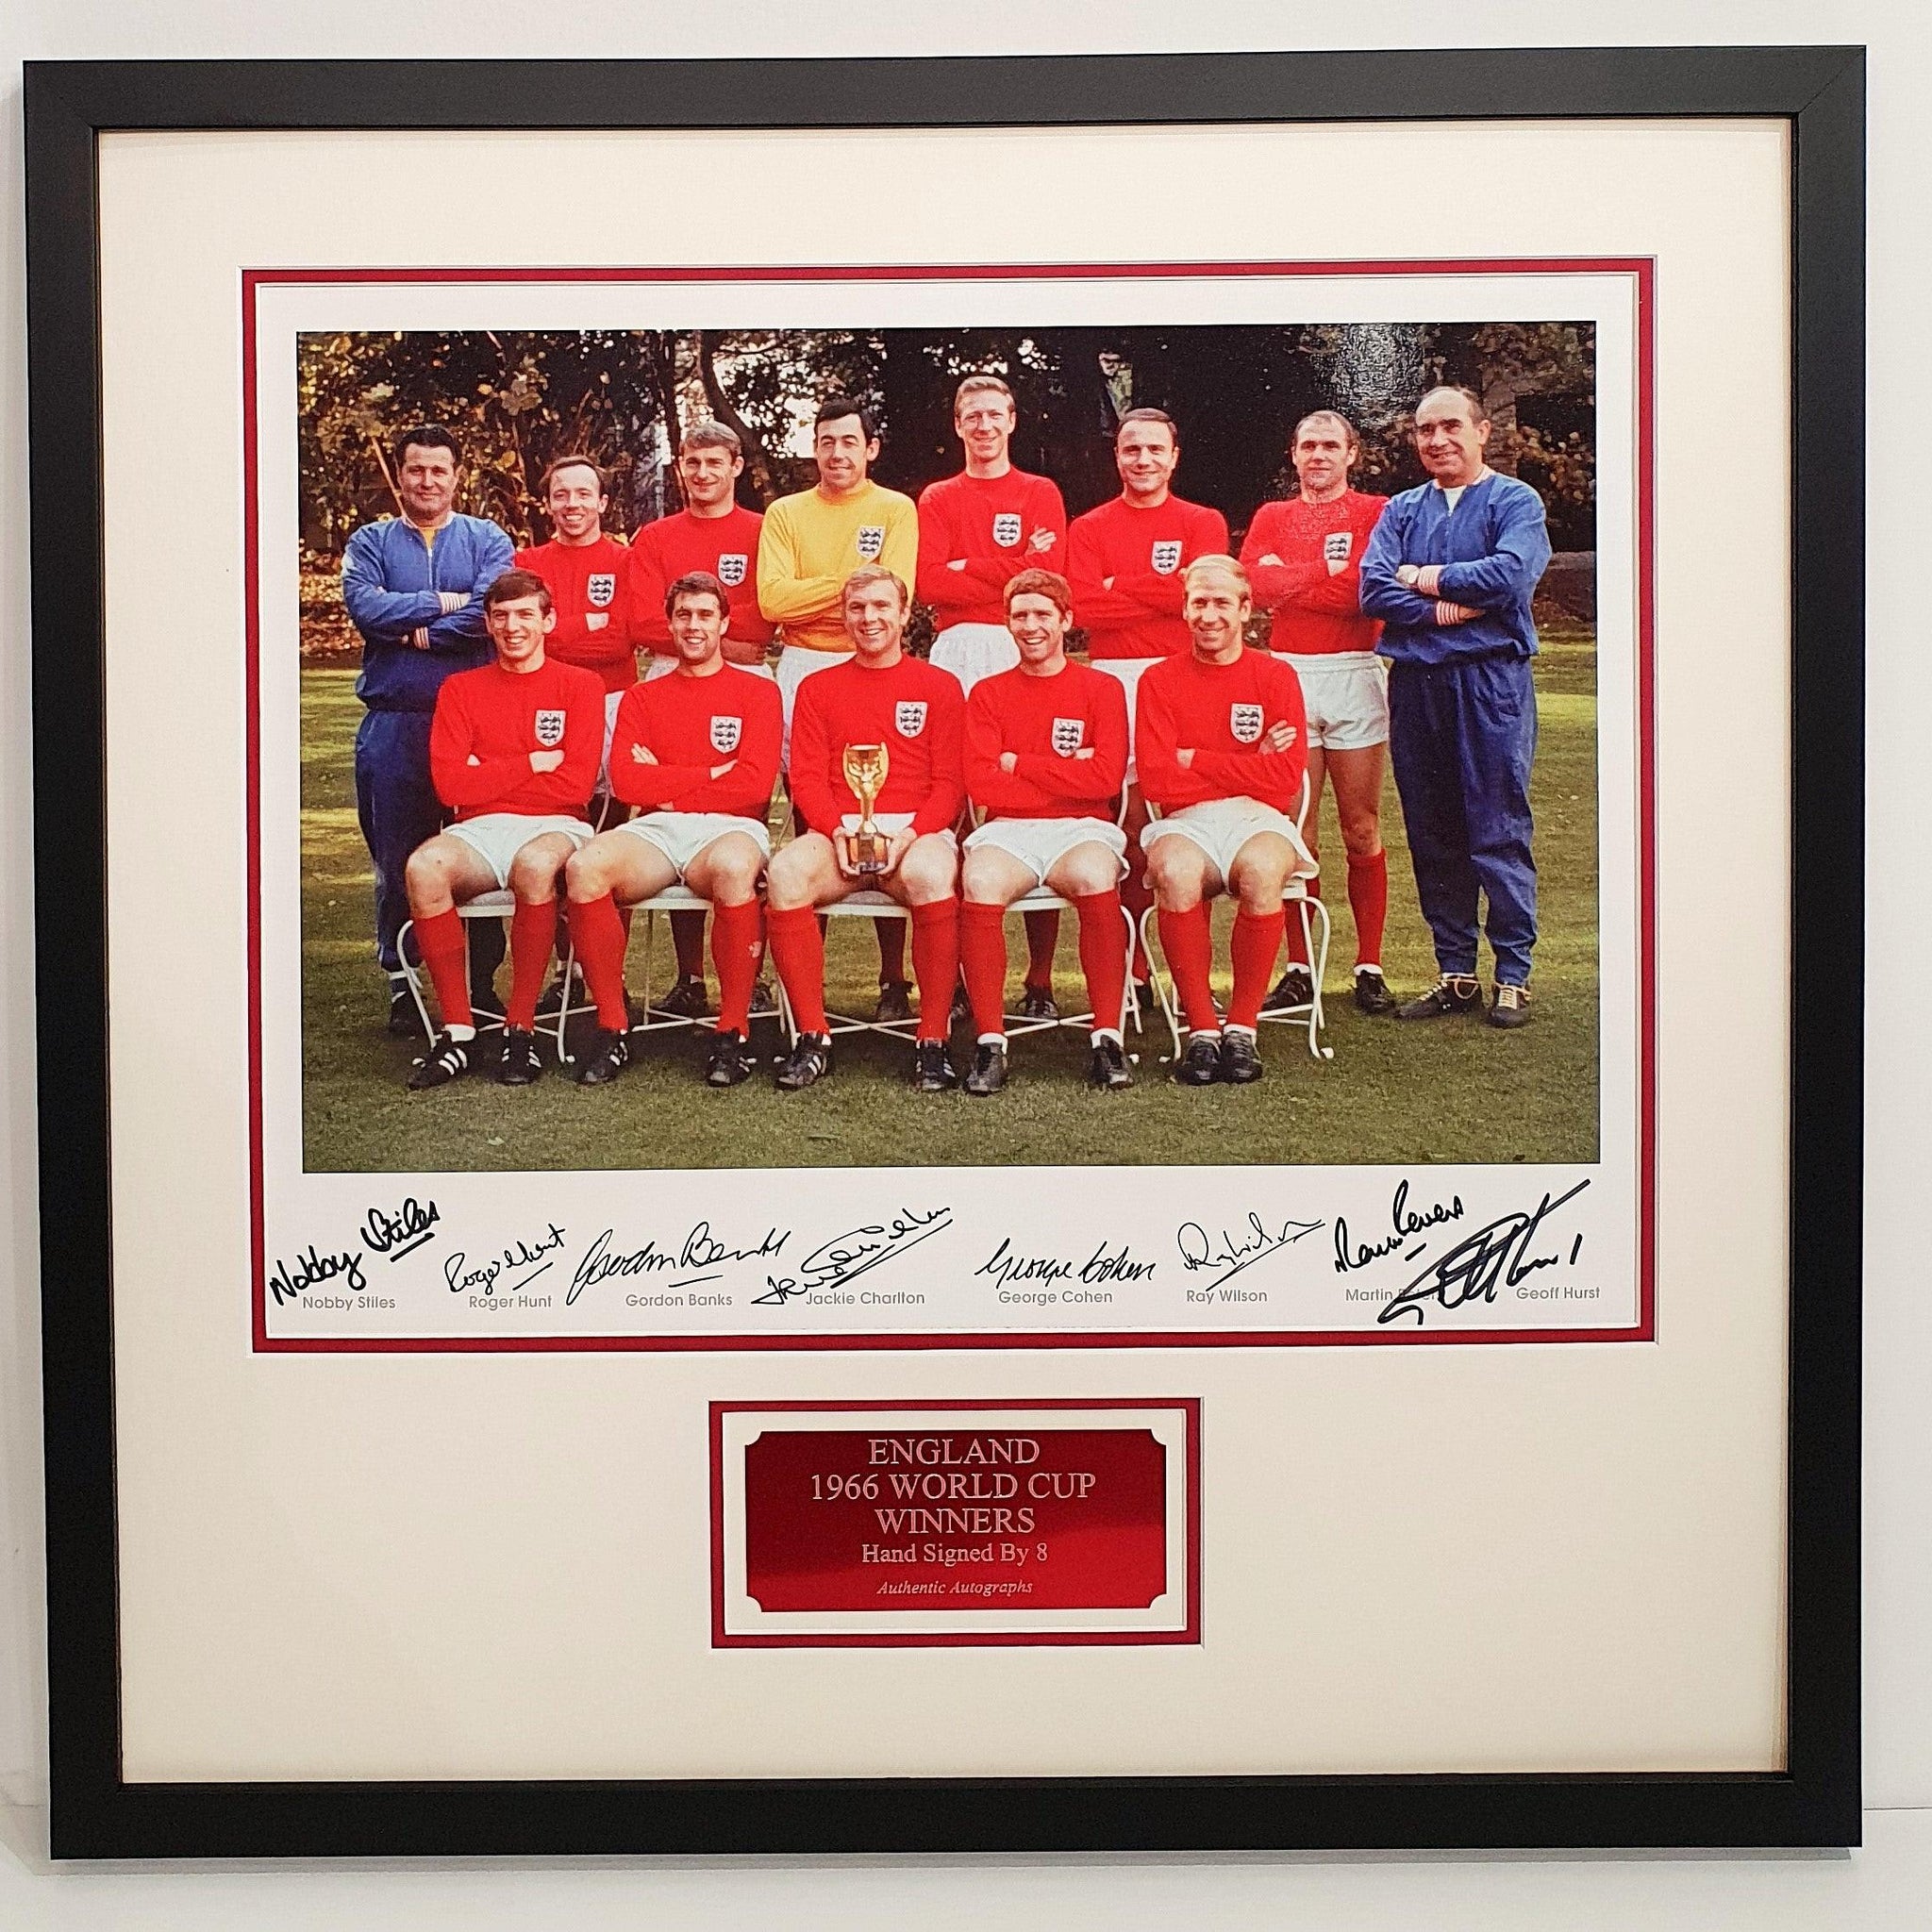 England 1966 World Cup Winners Photo Signed by 8 Framed. - Darling Picture Framing